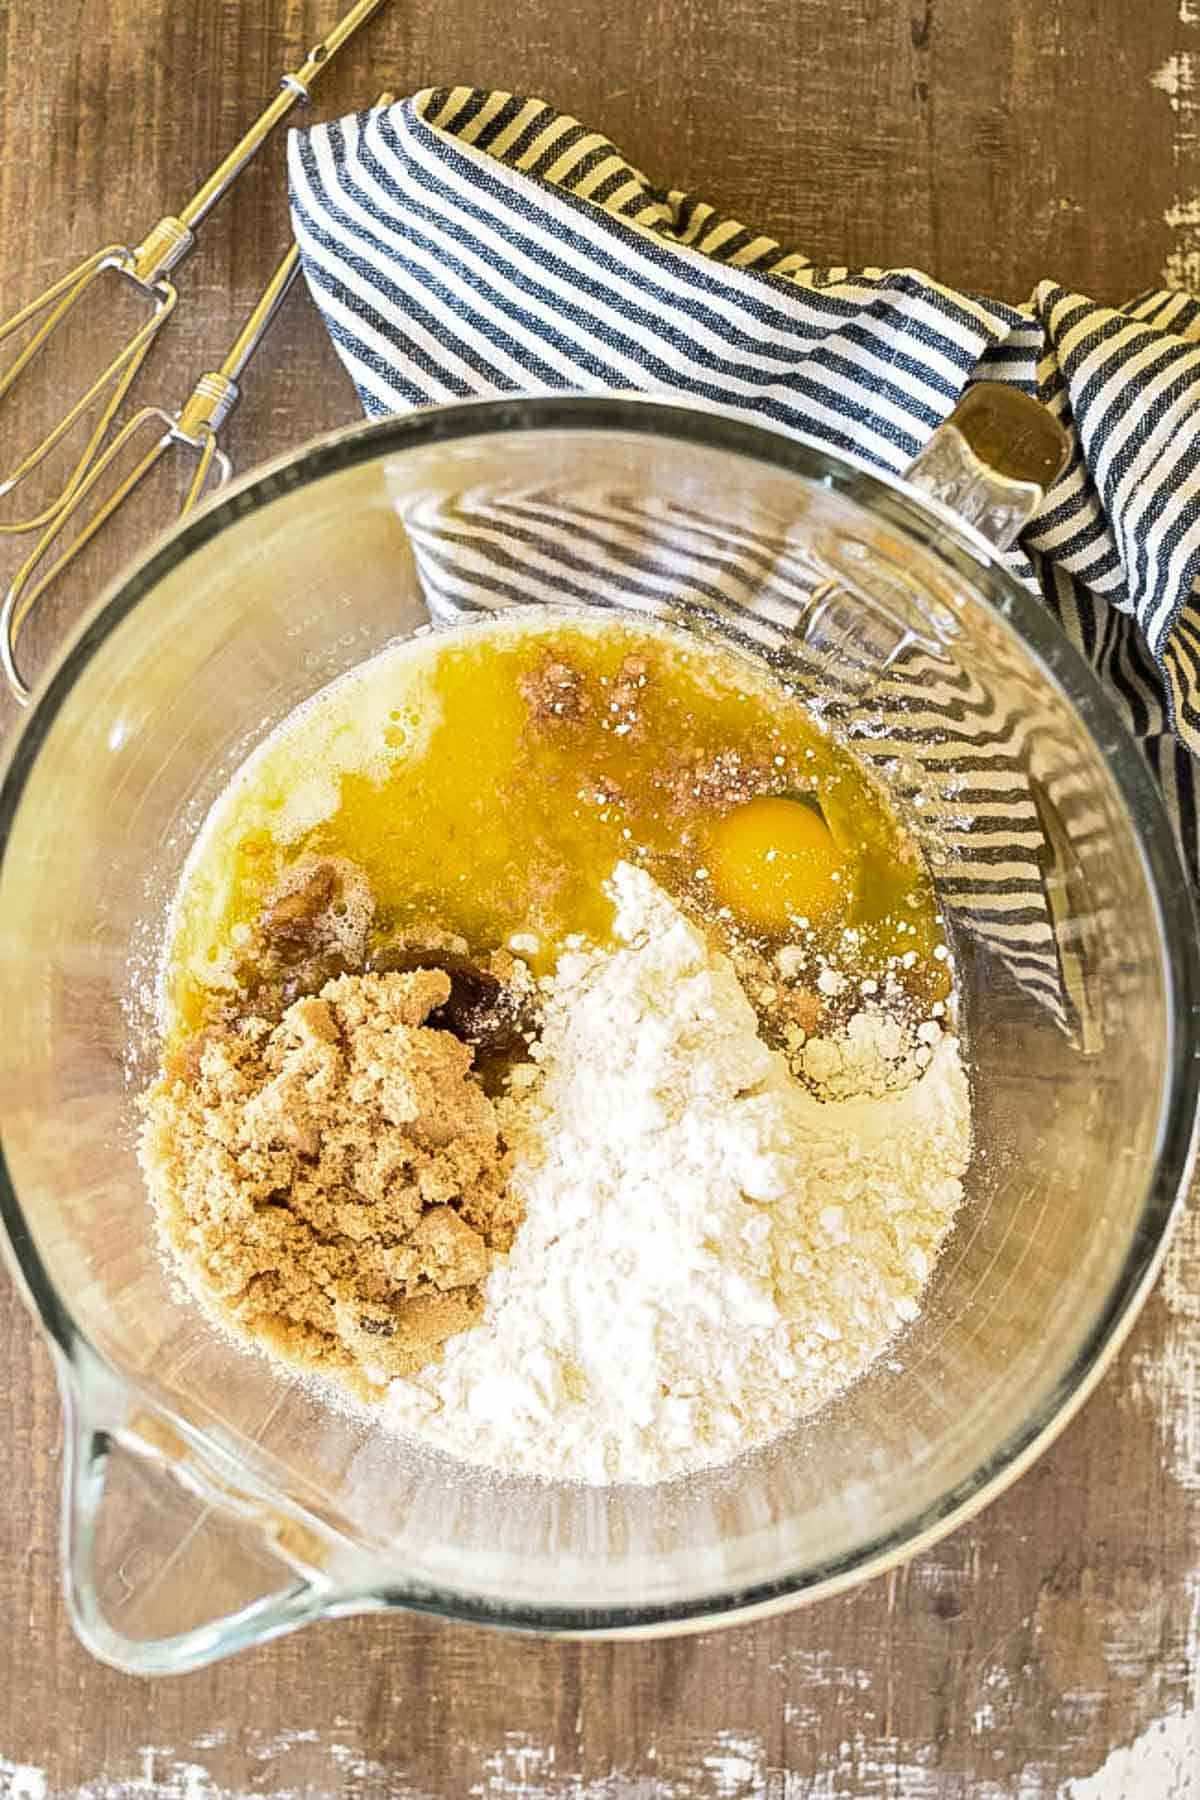 A dry white cake mix, melted butter, and brown sugar in a mixing bowl for an electric mixer.